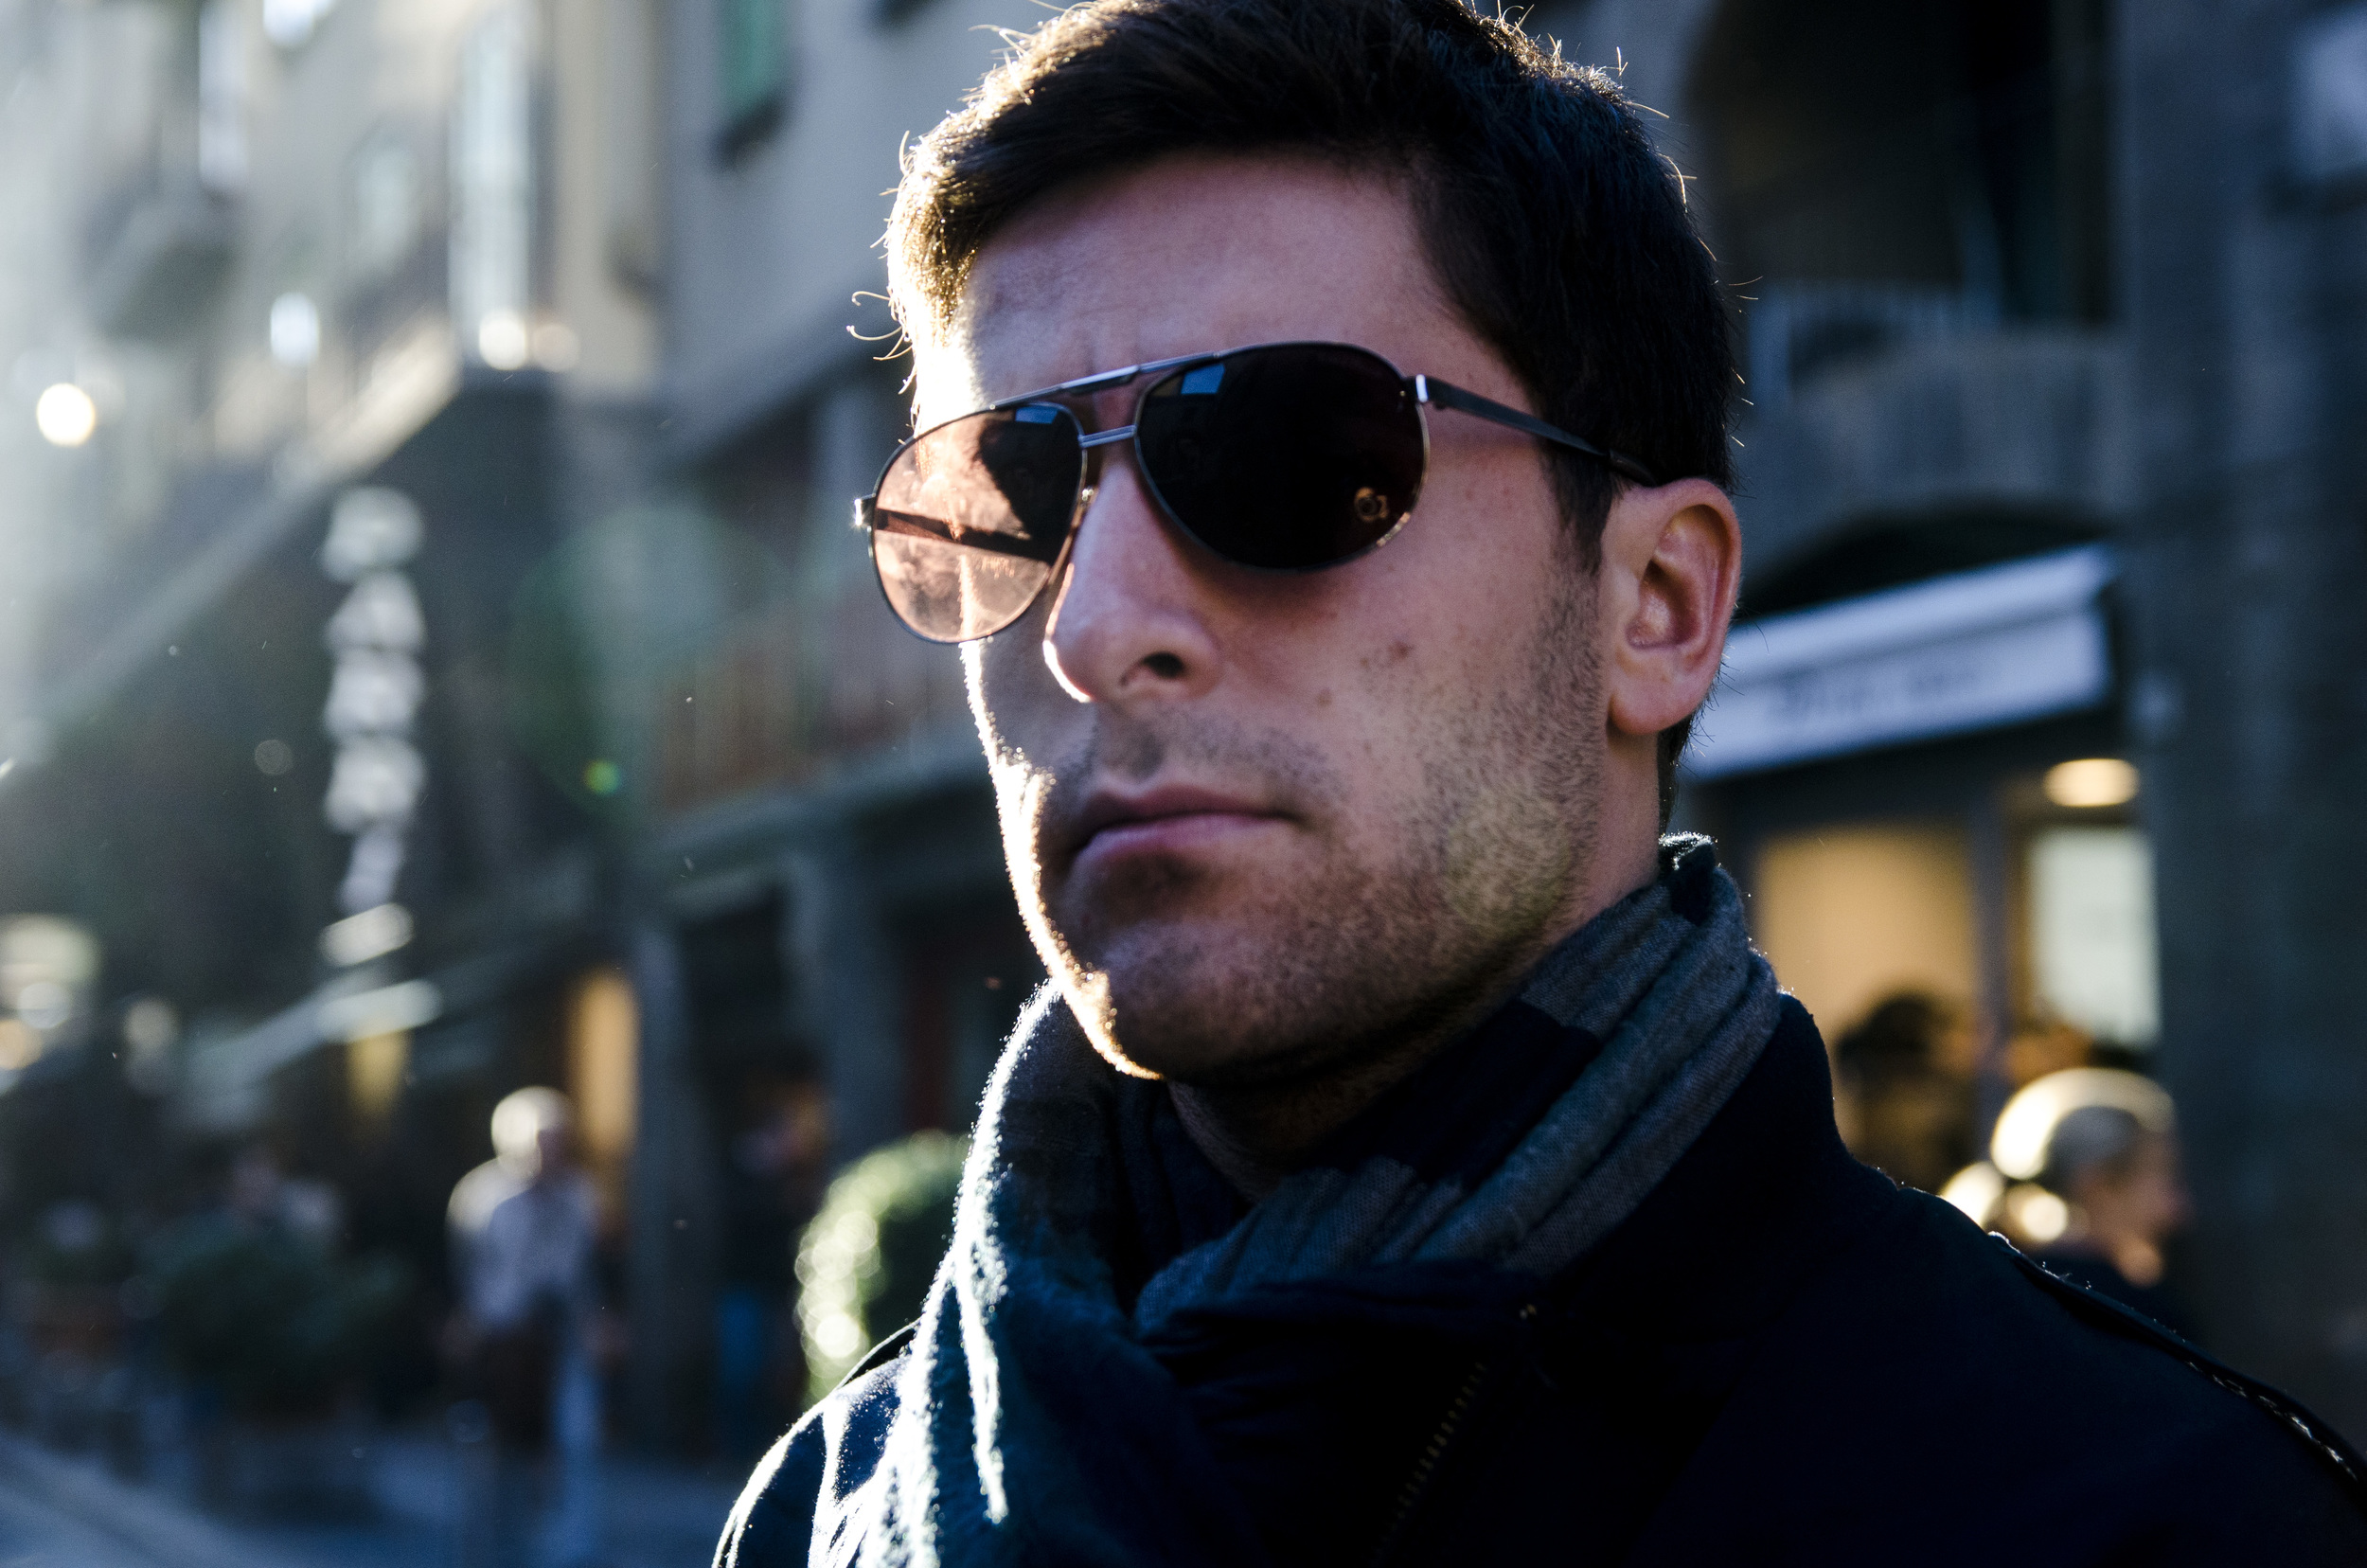  Joseph Fierberg stands on the streets of Florence, Italy basking in the golden beams of the sun.&nbsp; 